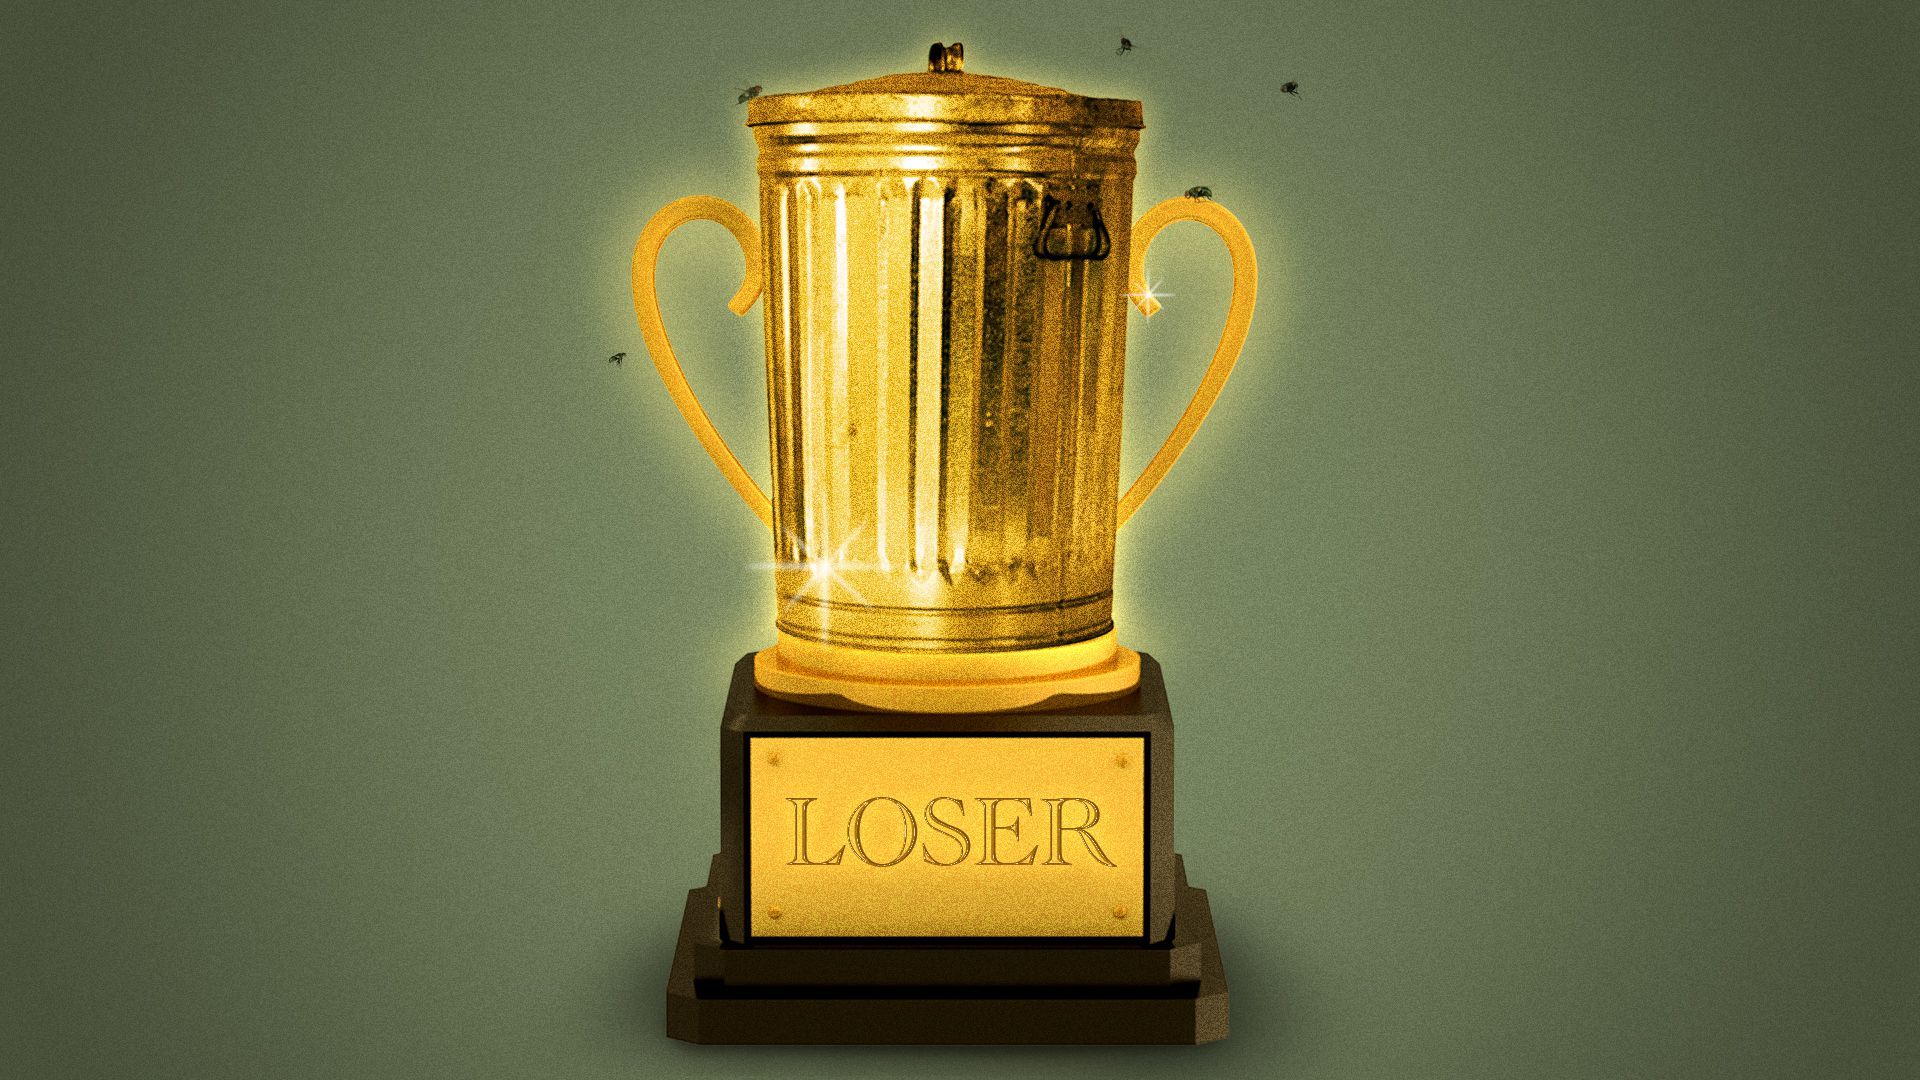 Illustration of flies swarming around a trophy made of a trashcan with a plaque that says "Loser".